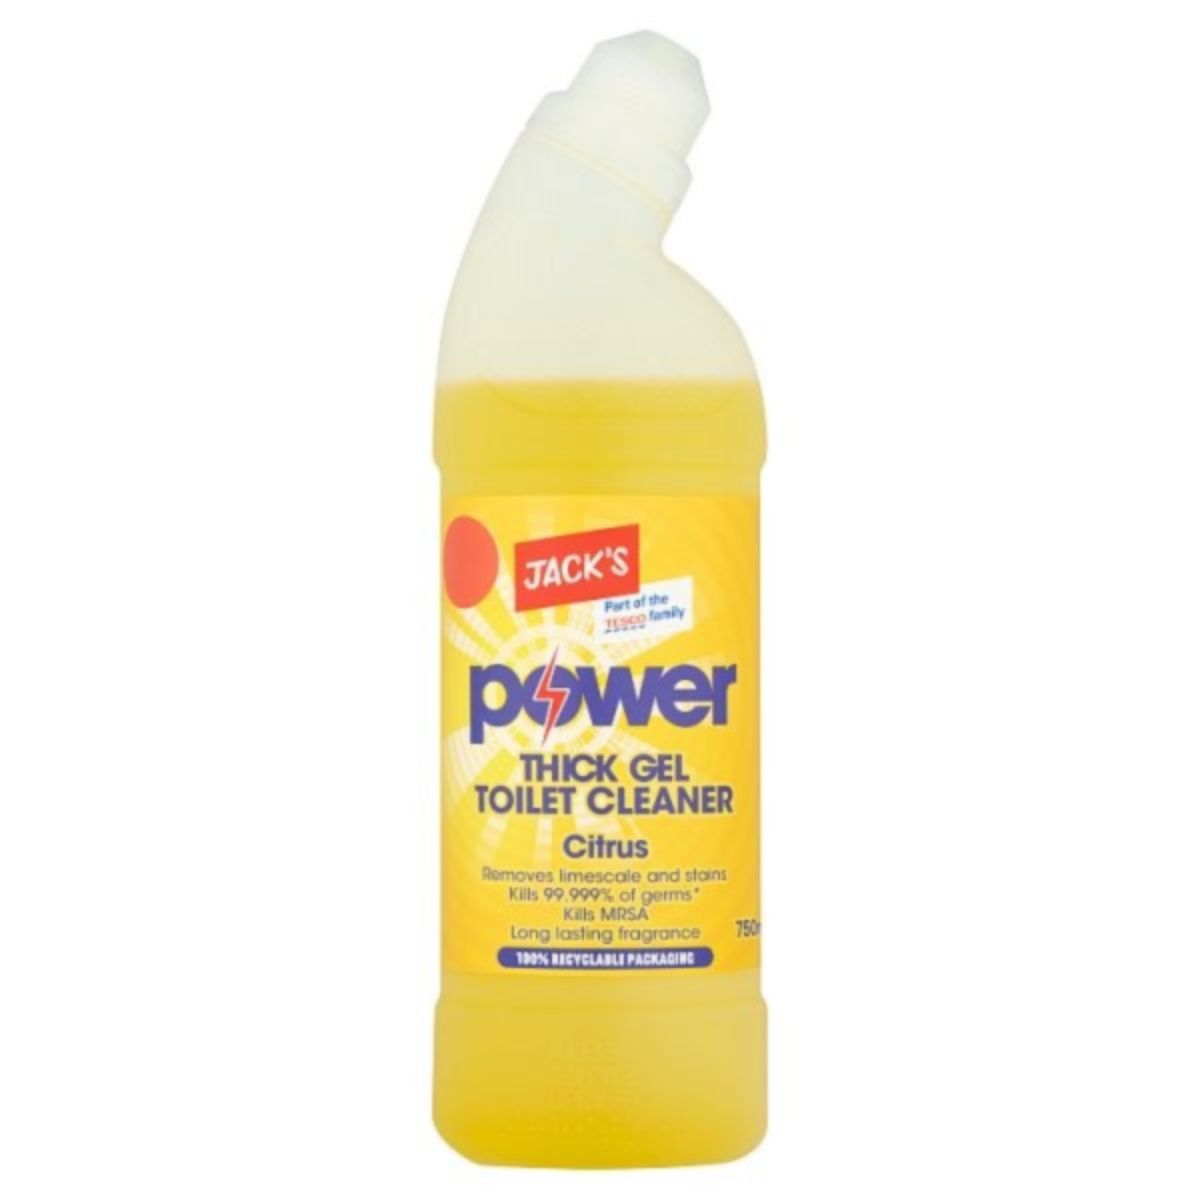 A bottle of Jacks - Power Thick Gel Toilet Cleaner Citrus - 750ml on a white background.